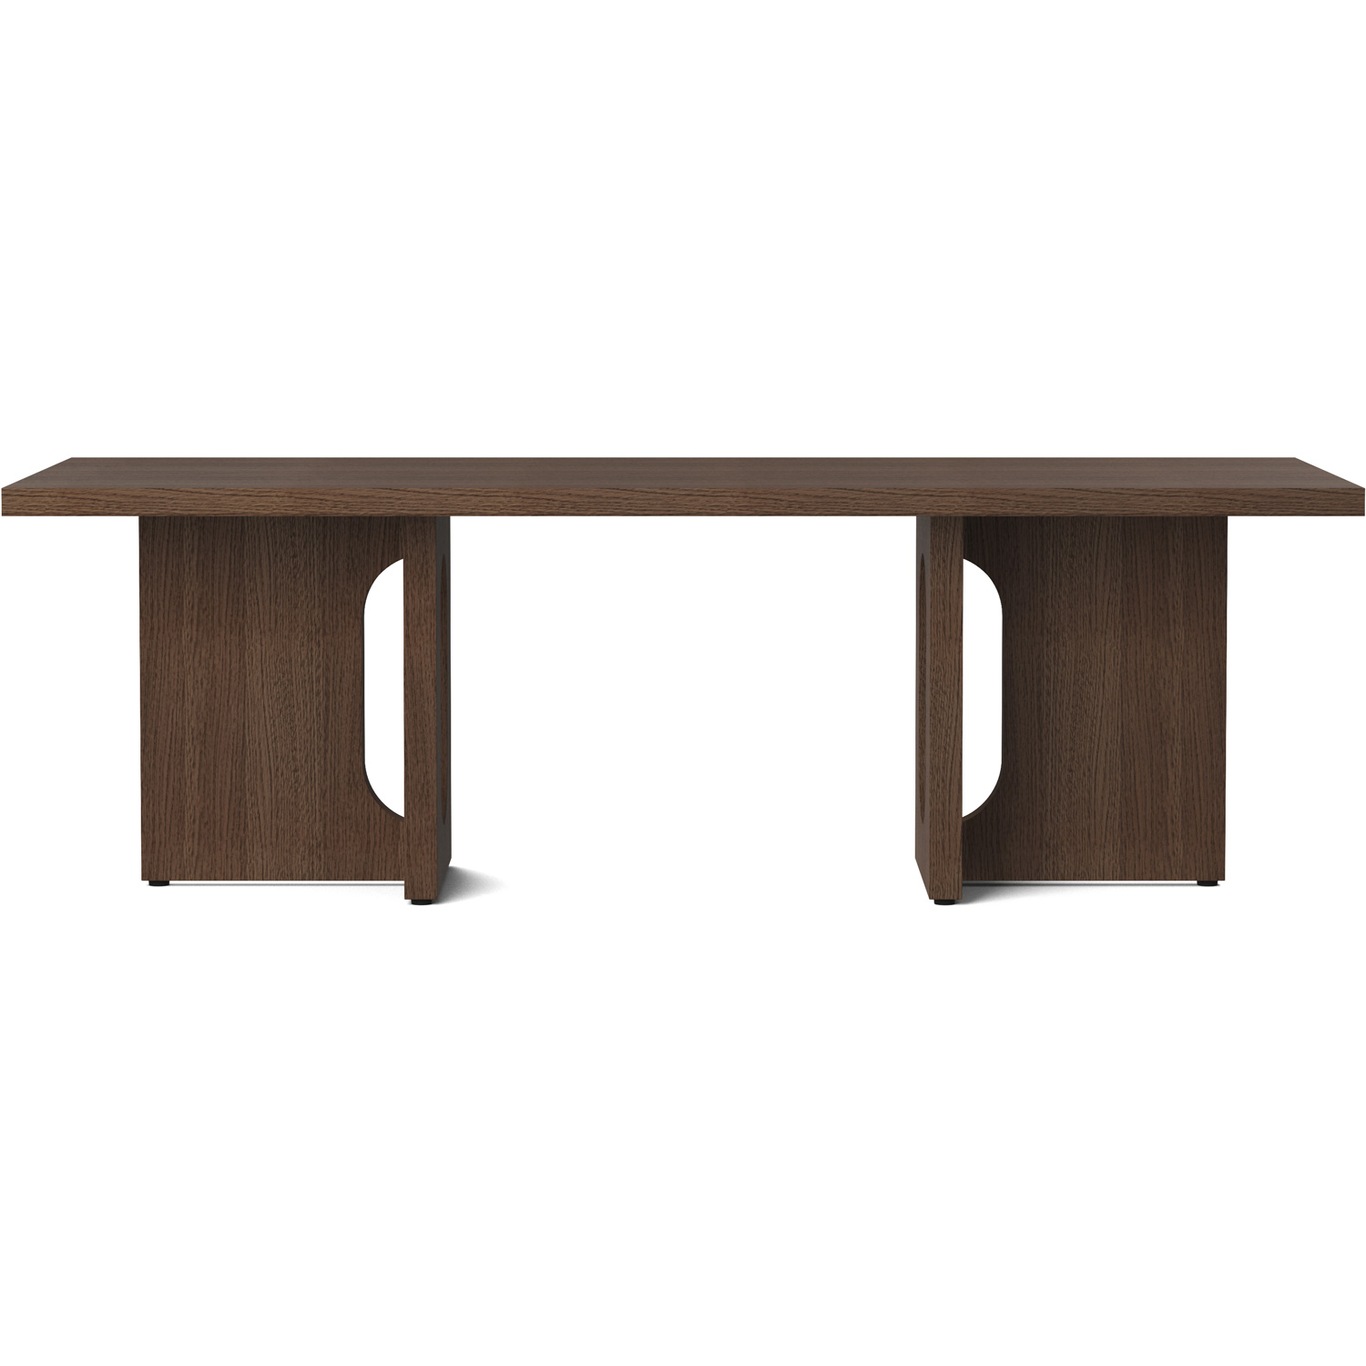 Androgyne Coffee Table, Dark Stained Oak